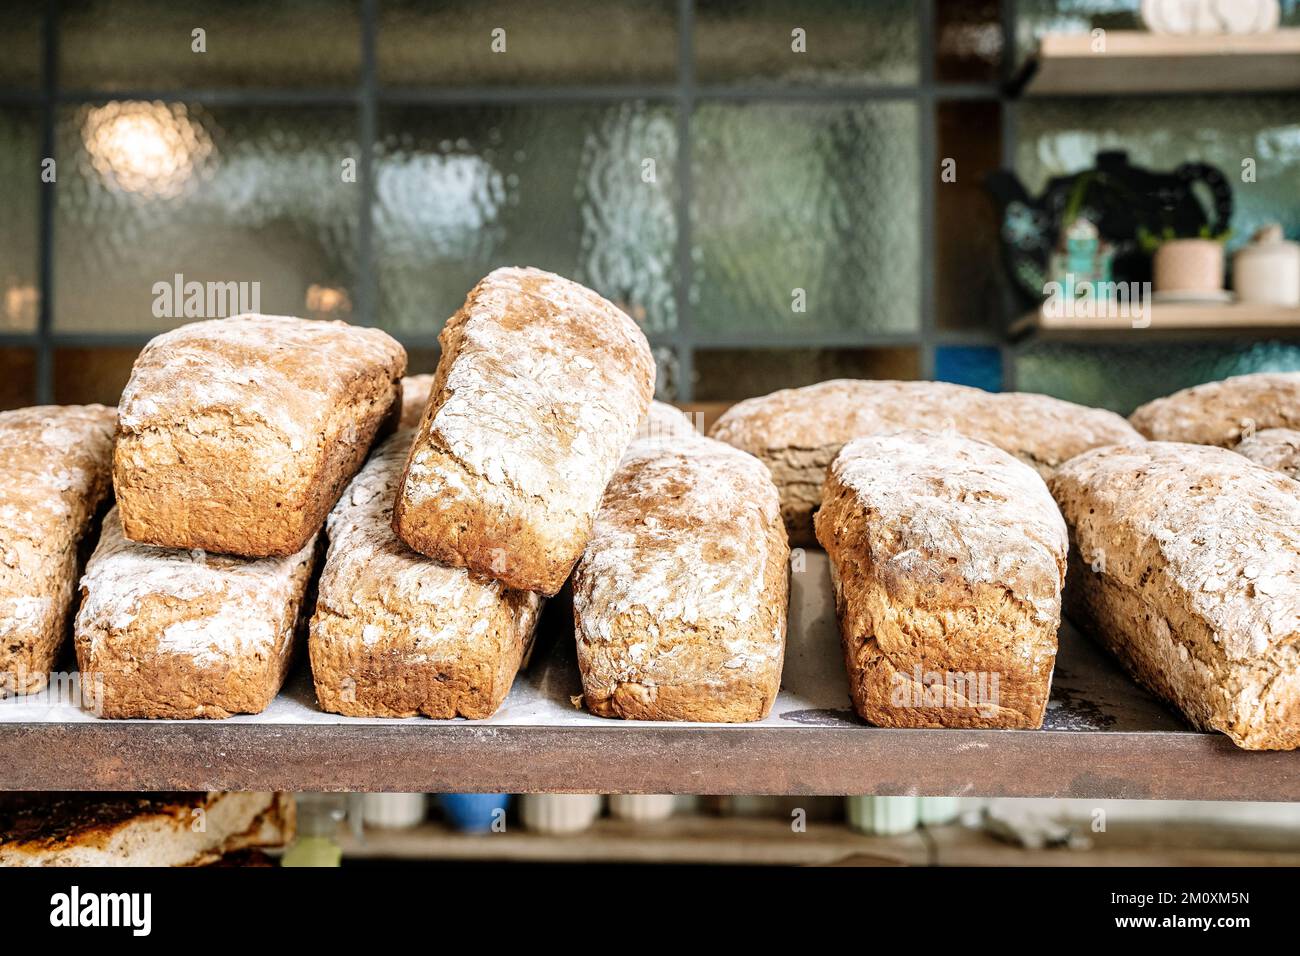 Loaves of bread on the shelves of the shop bakery counter. Fresh, homemade wheat and whole grain breads and pastries. High quality photo Stock Photo